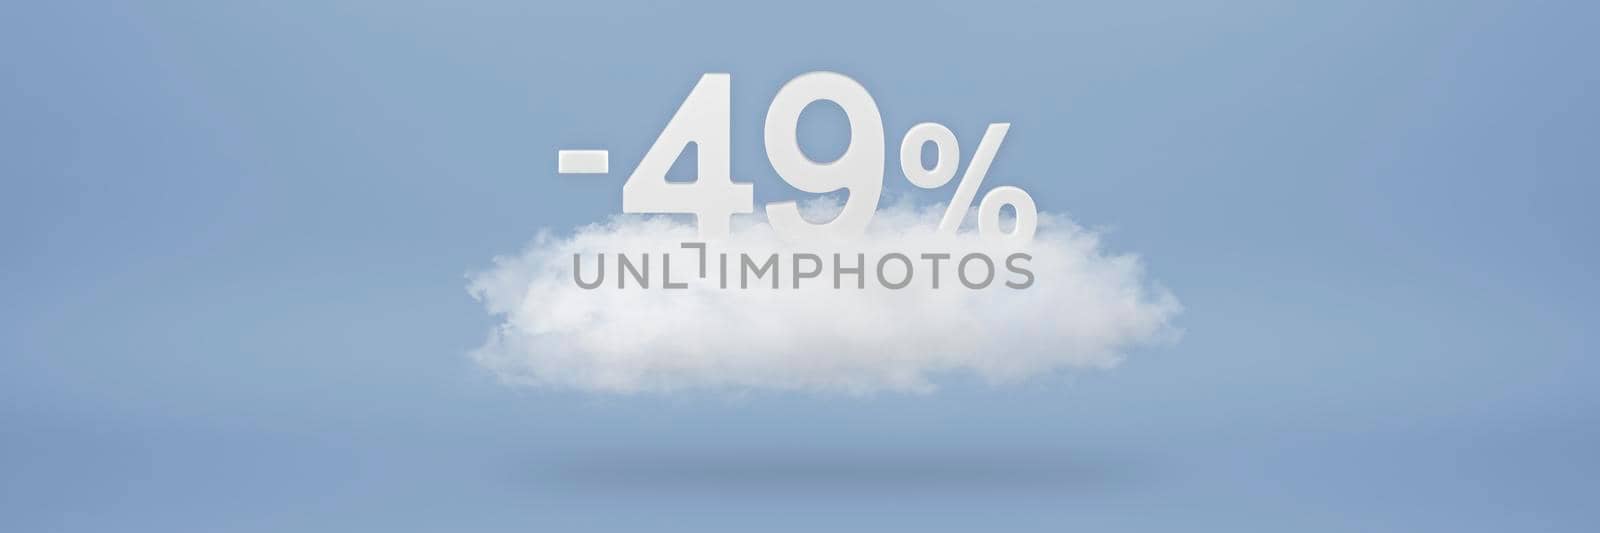 Discount 49 percent. Big discounts, sale up to forty nine percent. 3D numbers float on a cloud on a blue background. Copy space. Advertising banner and poster to be inserted into the project.